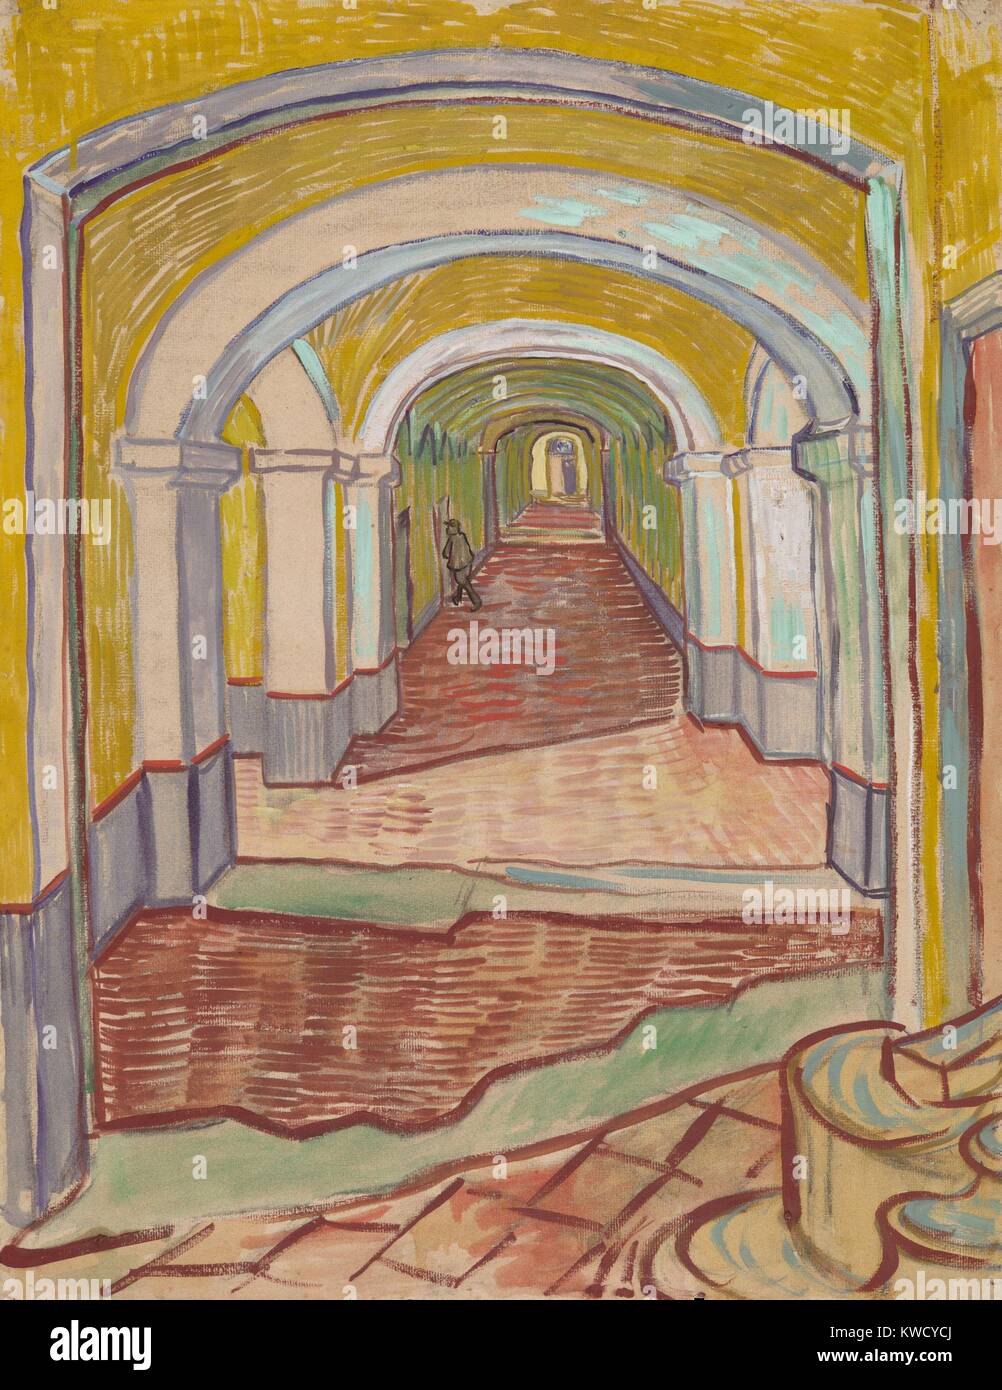 Corridor in the Asylum, by Vincent Van Gogh, 1889, Dutch Post-Impressionist painting. This mixed media work of oil color and black chalk on pink paper, used exaggerated linear perspective to expressively paint the Saint-Remy Asylum in Arles (BSLOC 2017 5 56) Stock Photo